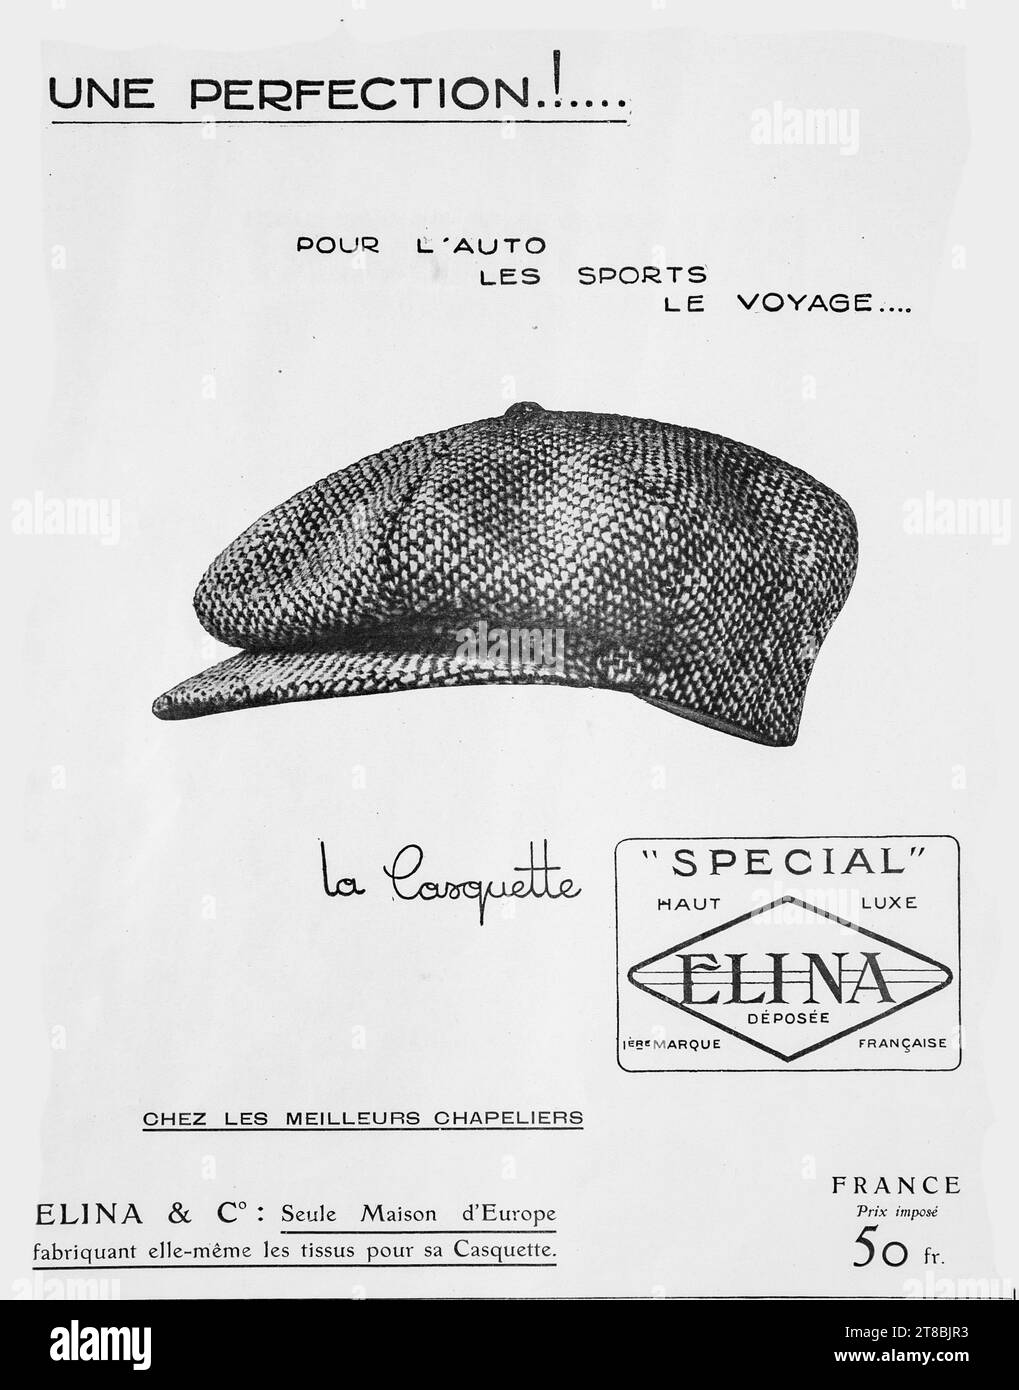 Vintage 1920s French advertisement for ELNA’s  la cosquette Special' luxury cap, ideal for sports and travel. Stock Photo